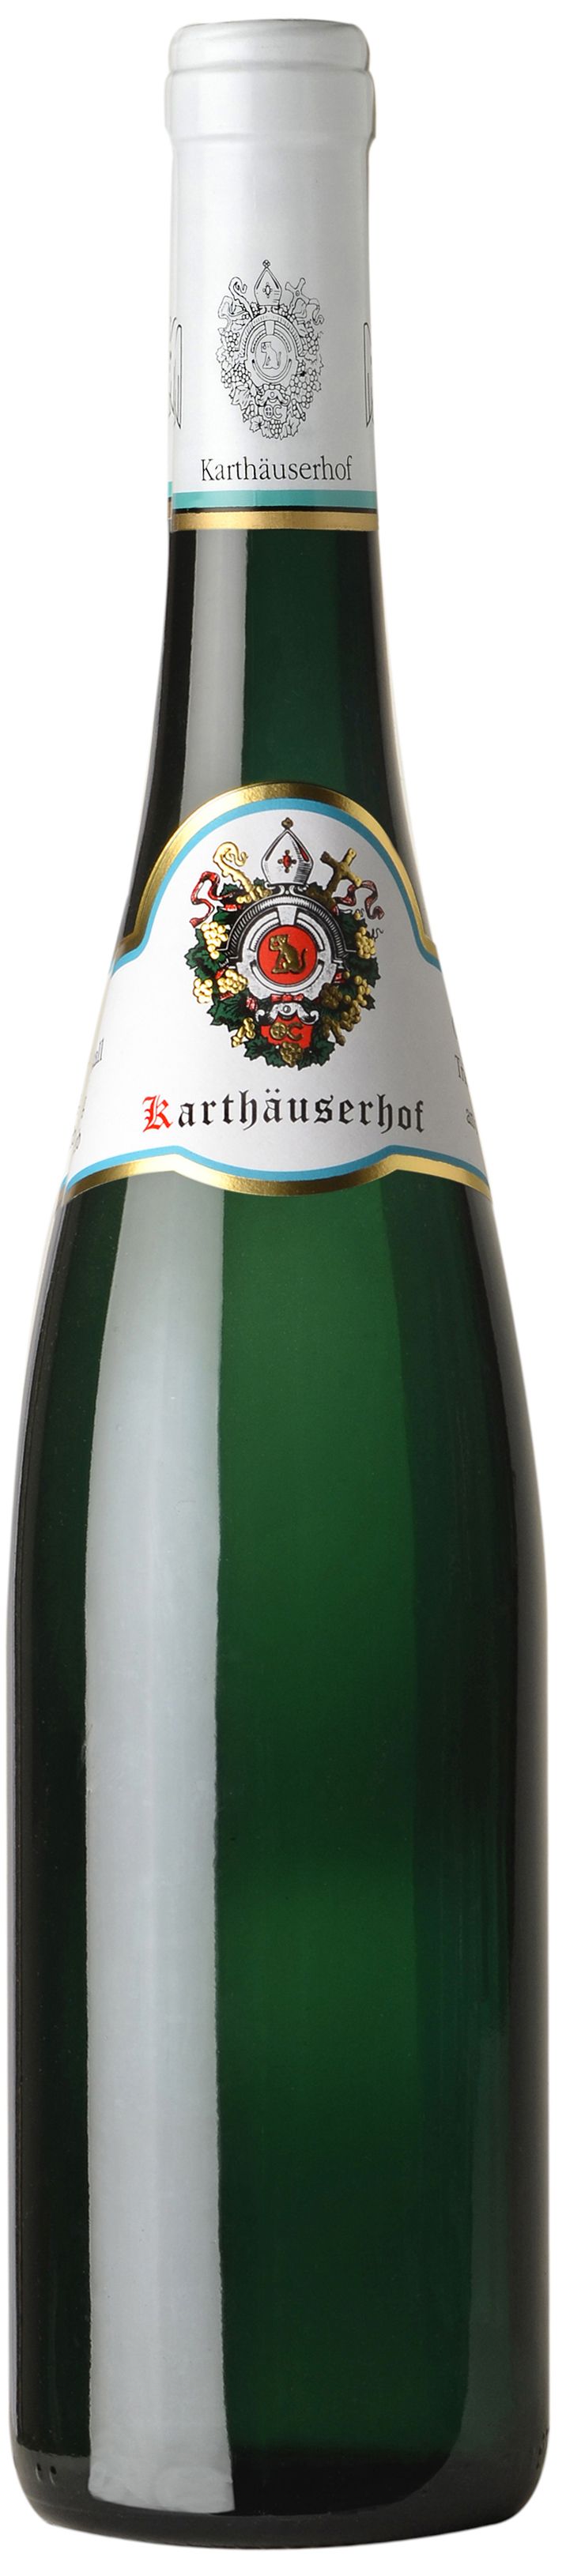 Karthauserhof, Tyrell's Edition Riesling Spatlese, 2013